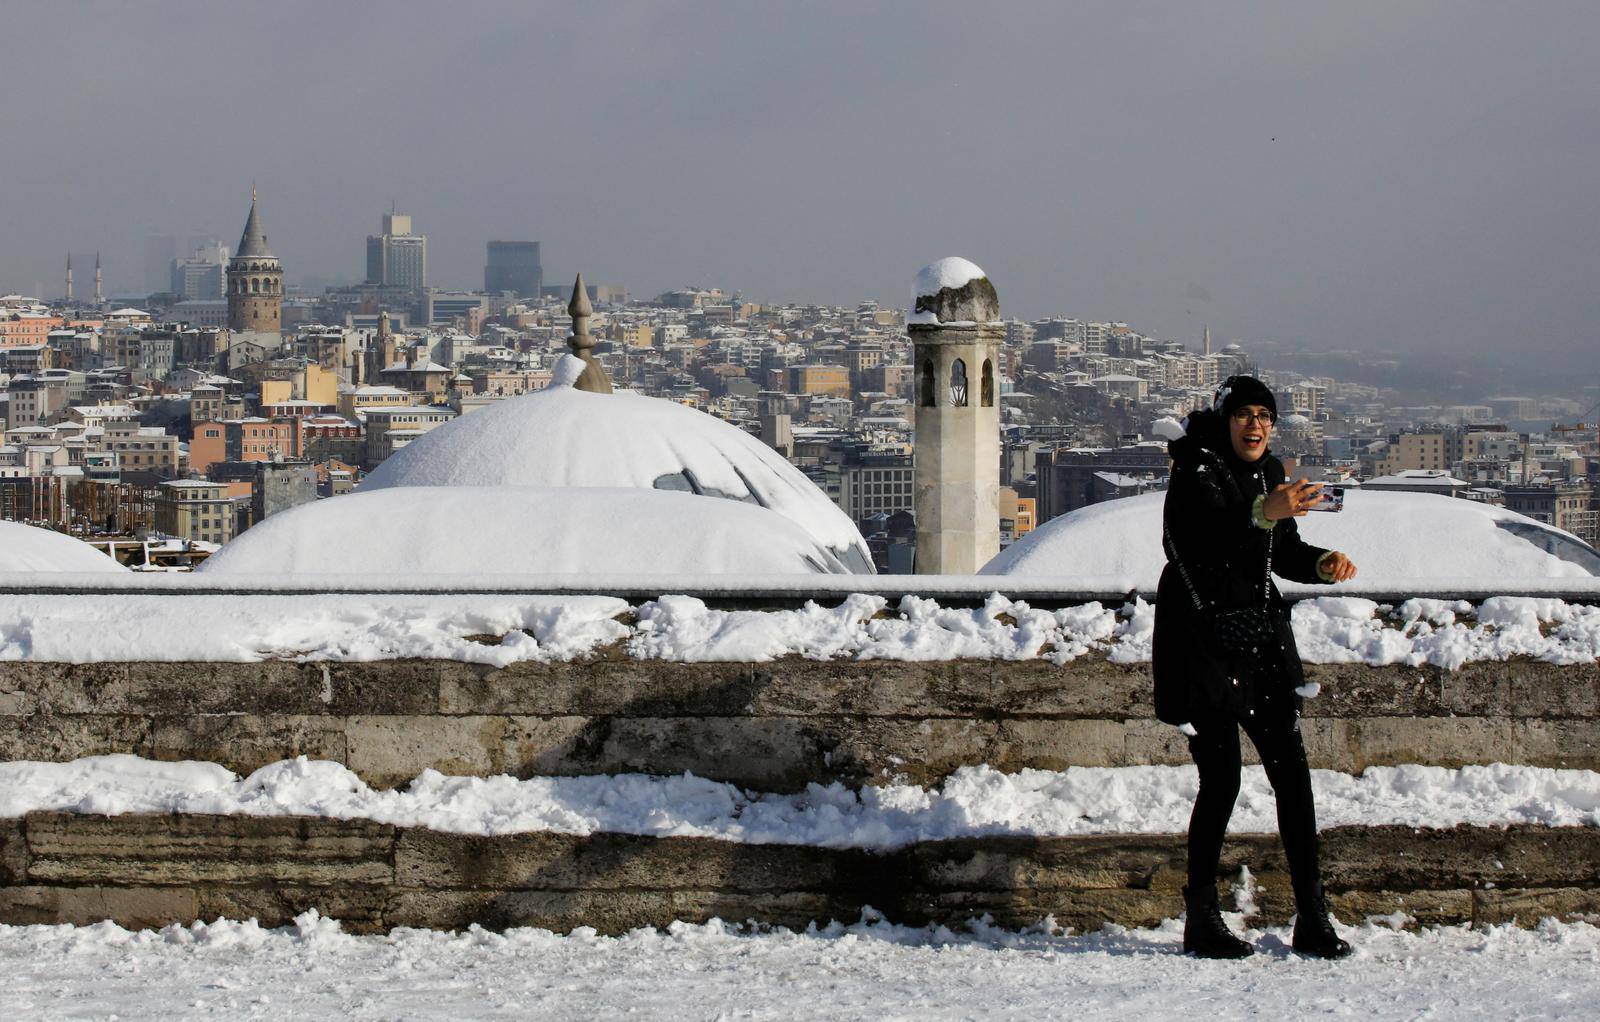 A woman enjoys a snowy day at the garden of Suleymaniye Mosque in Istanbul